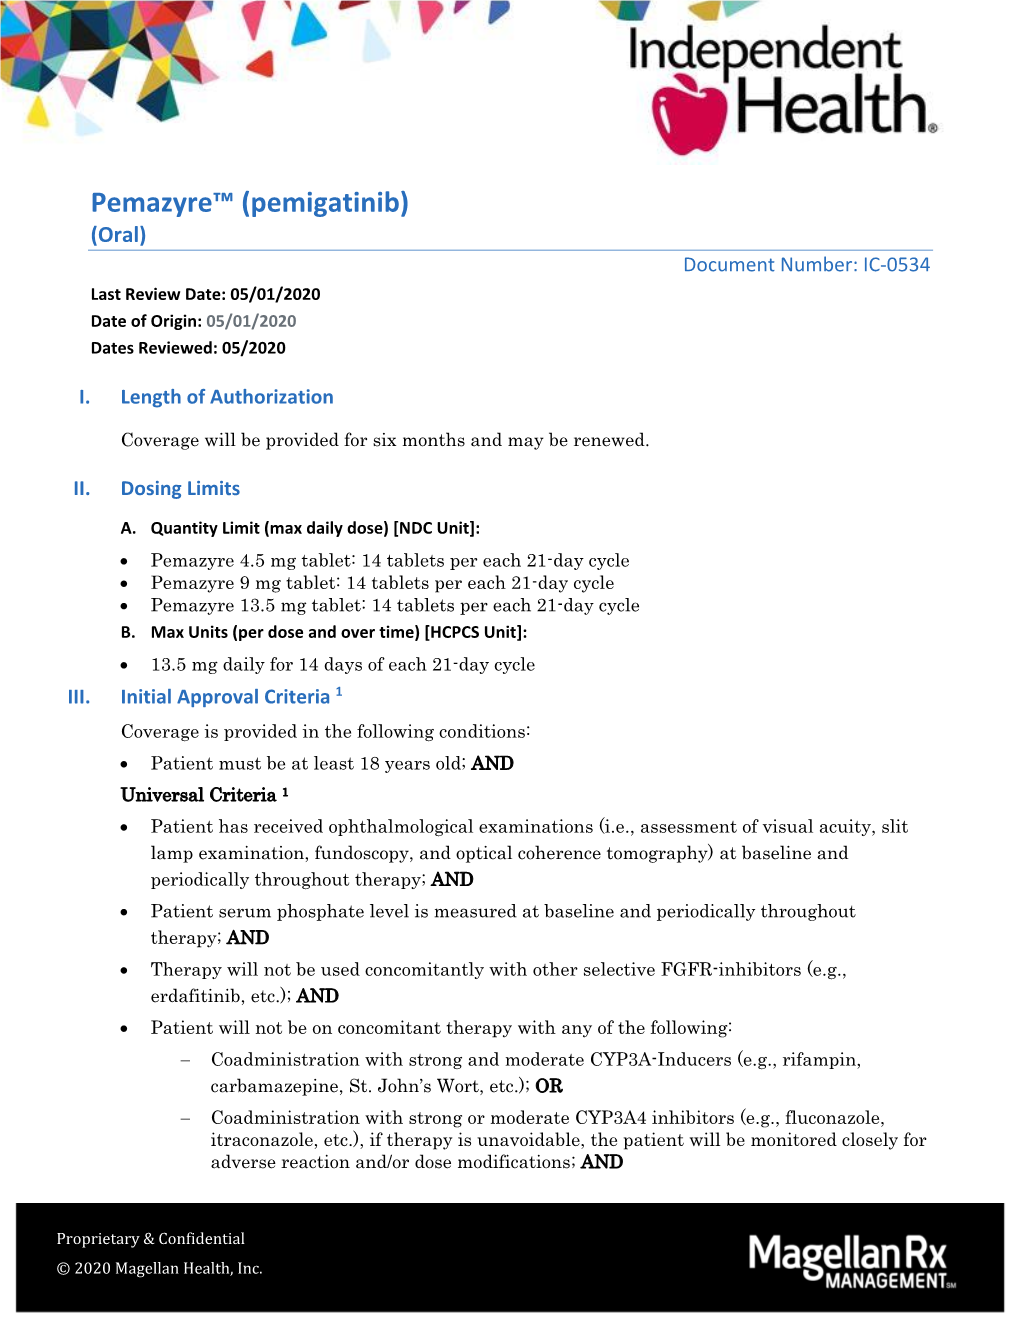 Pemazyre™ (Pemigatinib) (Oral) Document Number: IC-0534 Last Review Date: 05/01/2020 Date of Origin: 05/01/2020 Dates Reviewed: 05/2020